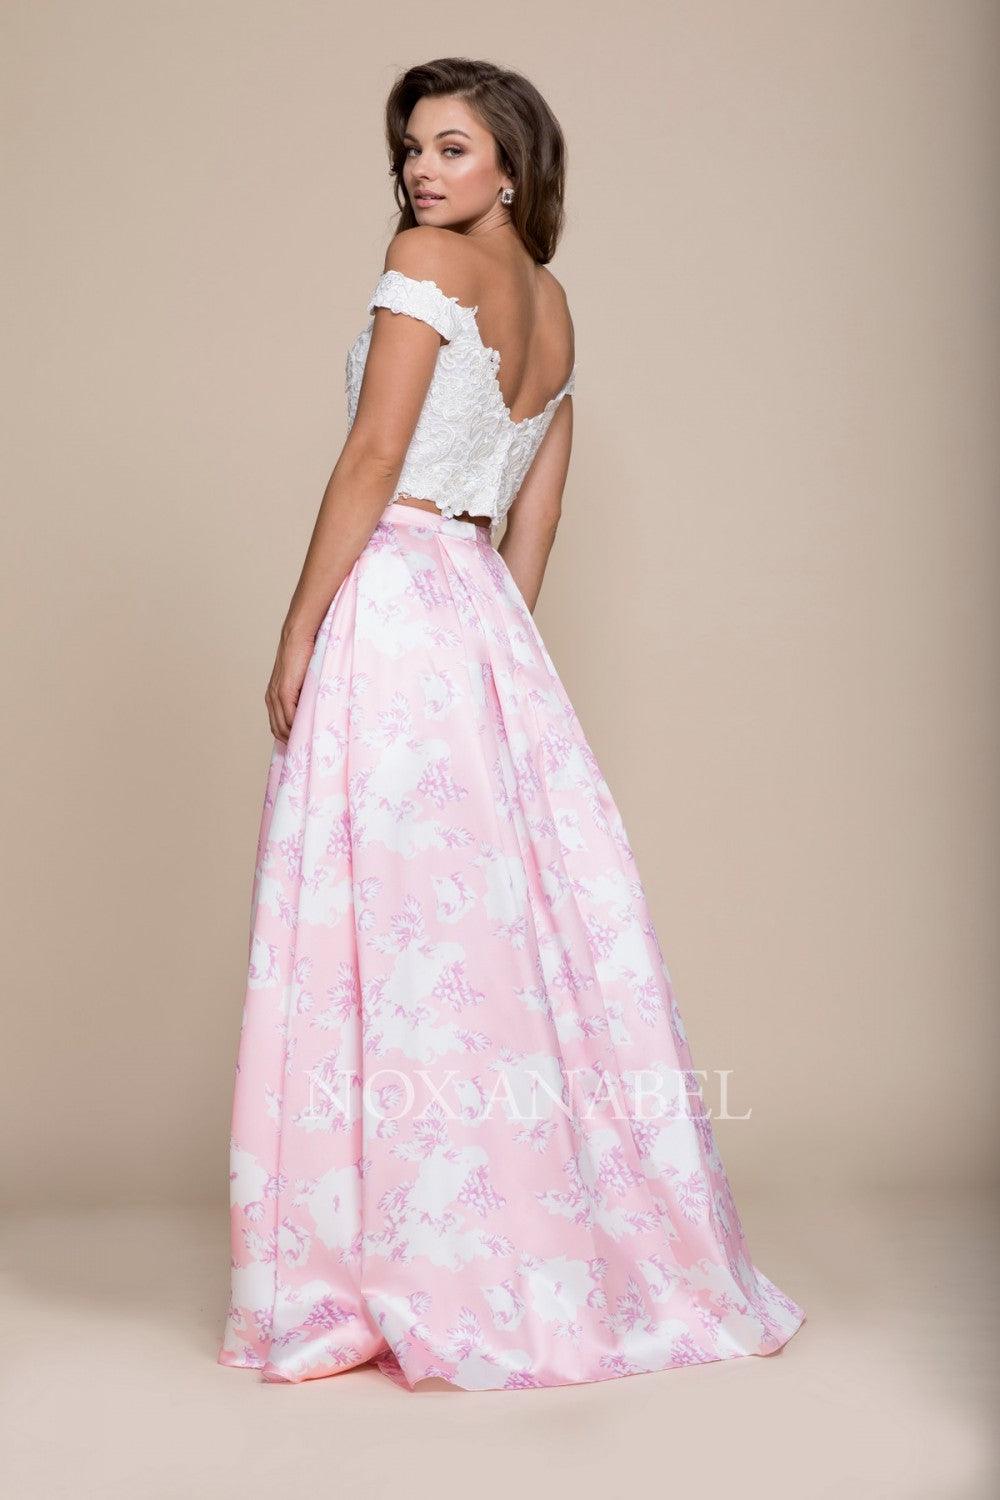 Long Two Piece Floral Print Prom Dress - The Dress Outlet Nox Anabel